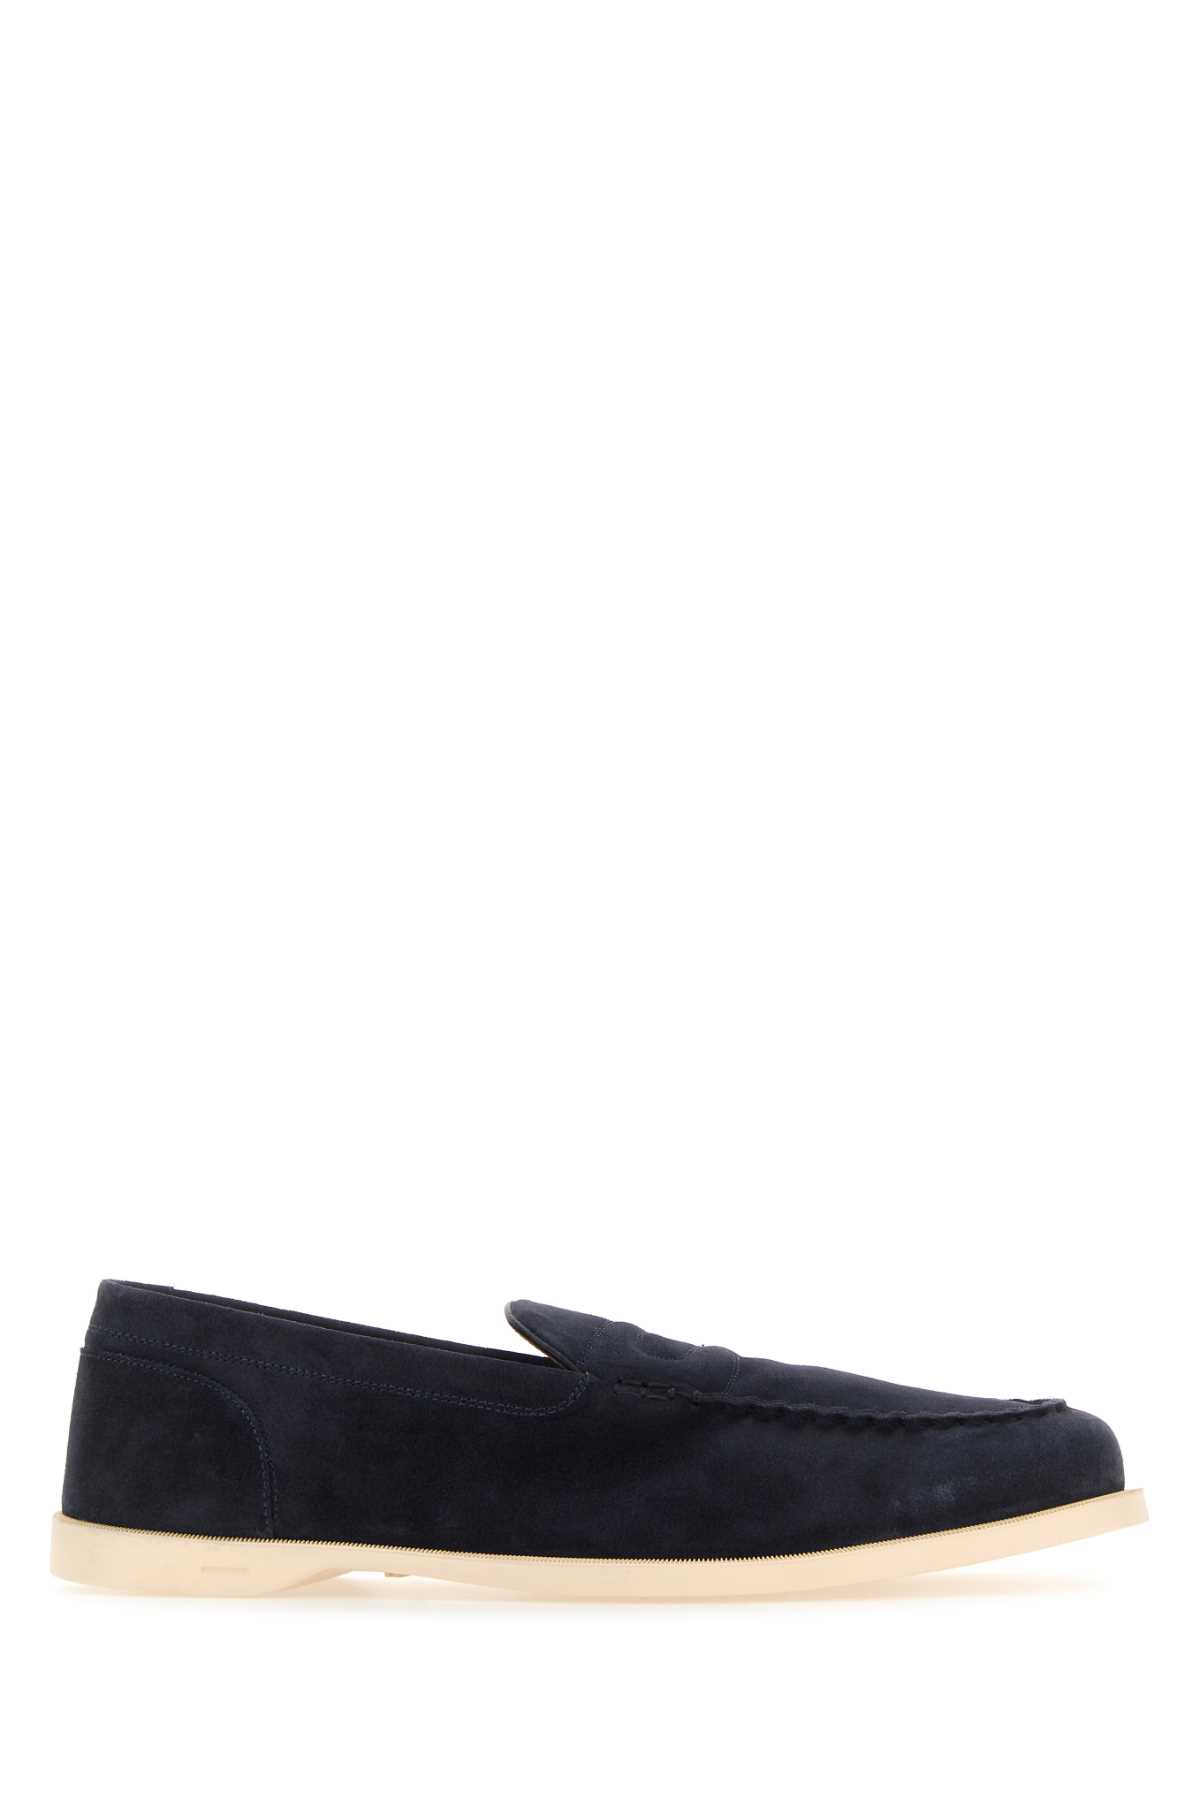 John Lobb Navy Blue Suede Pace Loafers In Black